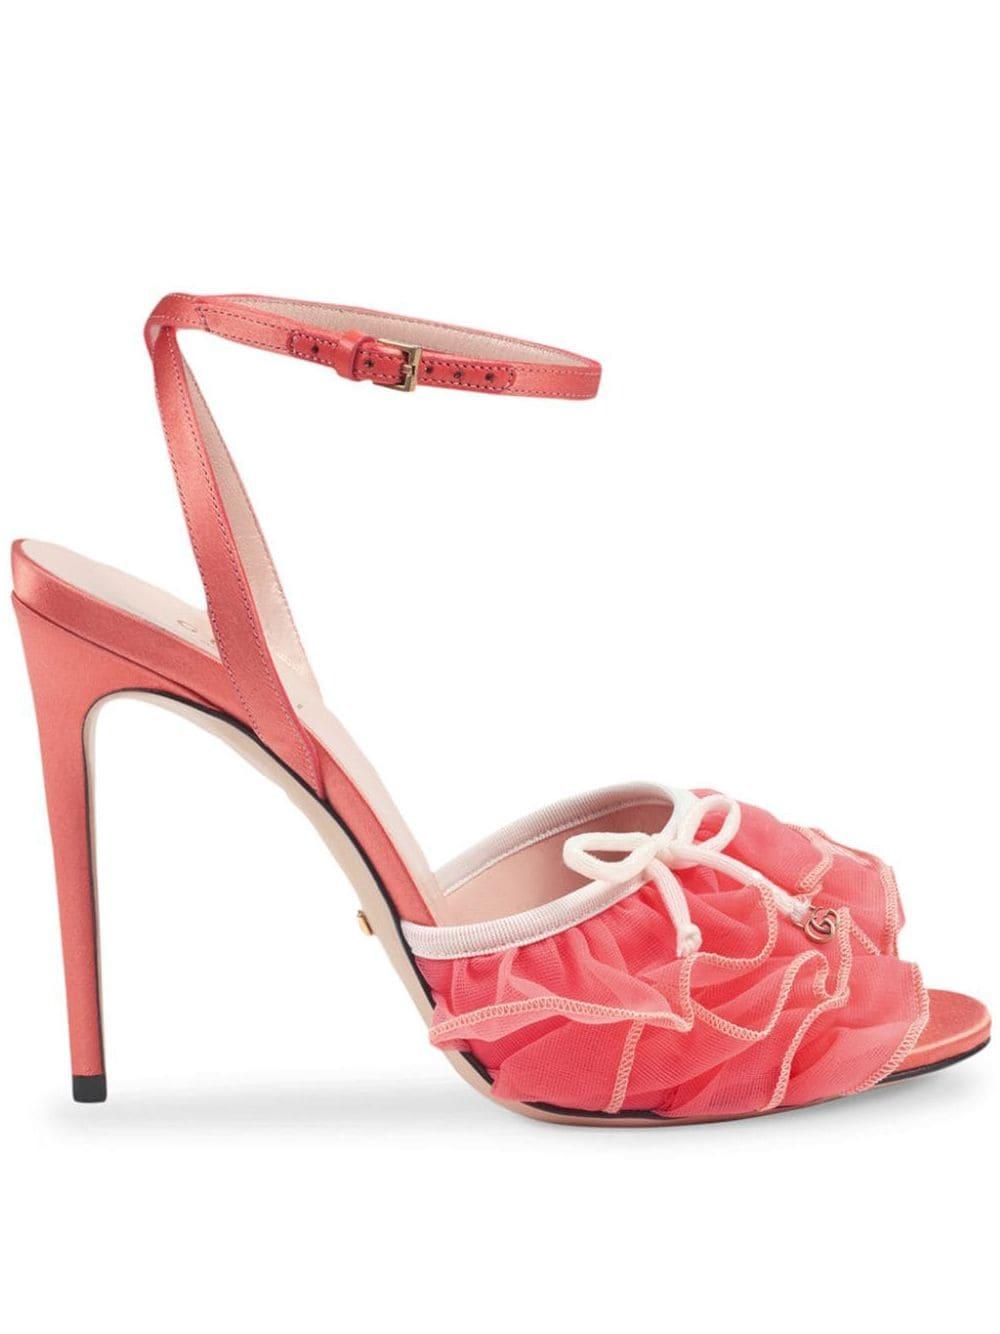 Gucci Tulle Sandals in Pink - Lyst